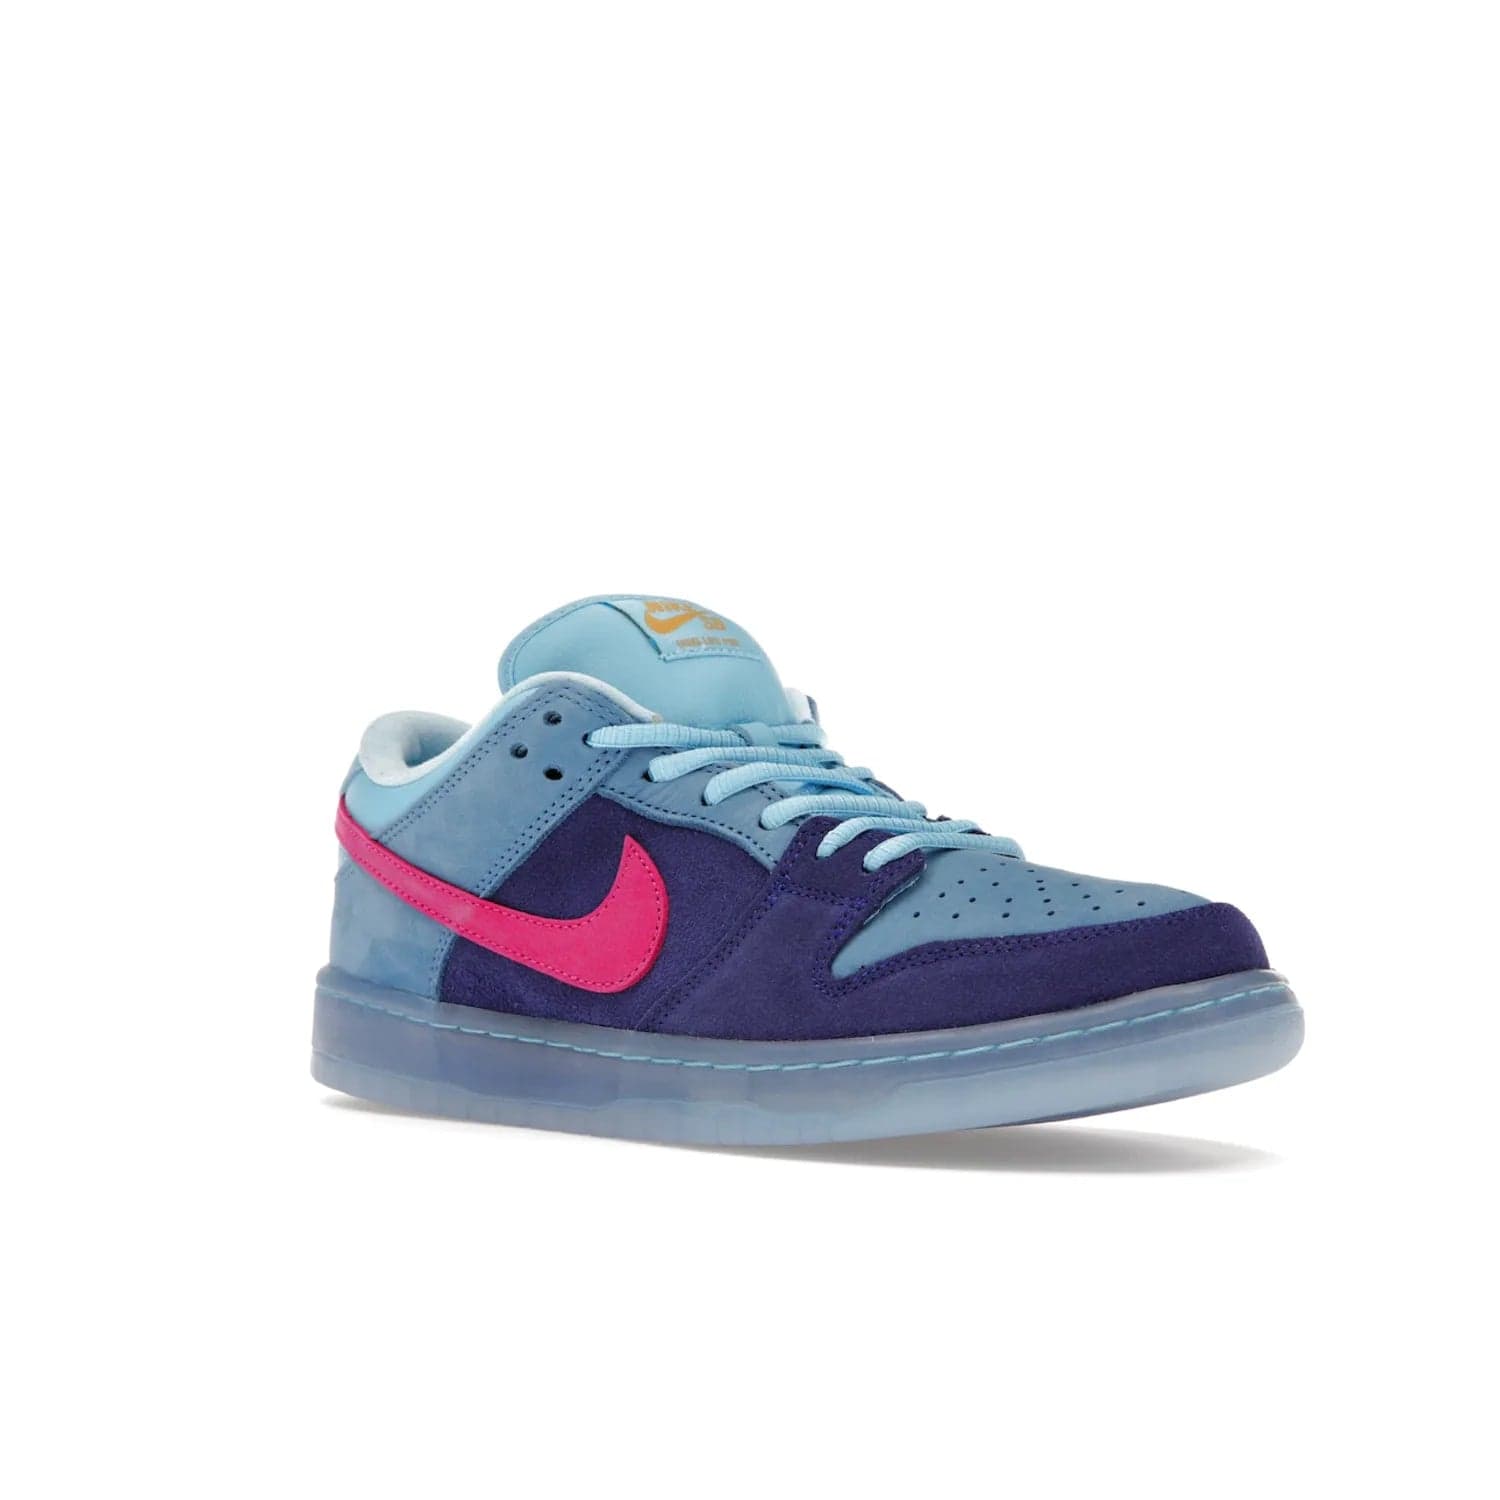 Nike SB Dunk Low Run The Jewels - Image 5 - Only at www.BallersClubKickz.com - The Nike SB Dunk Low Run The Jewels pays tribute to the Run the Jewels 3 album cover. It features a blue suede upper with pink suede accents, gold branding and 3 lace sets. RTJ insoles complete this limited edition sneaker. Get it now for your shoe collection.